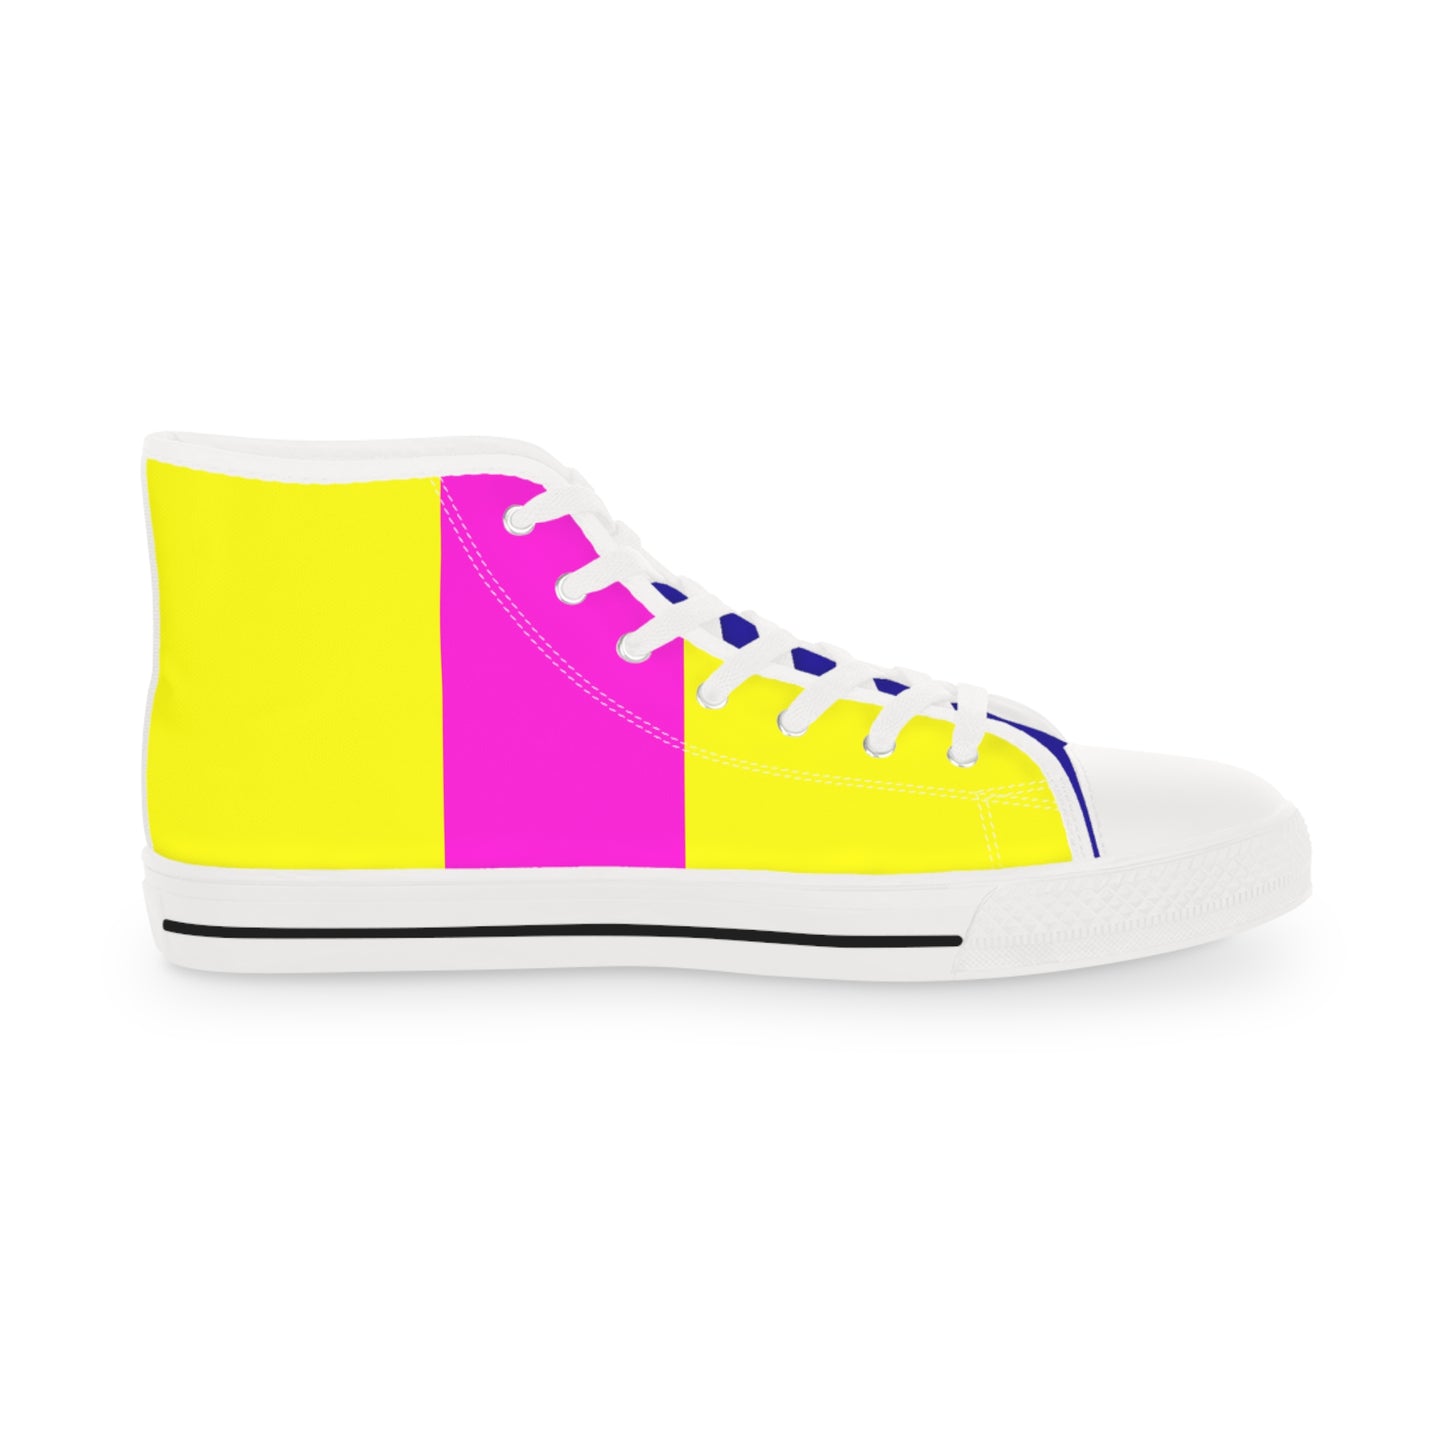 Limited Edition High Top Sneakers - 1